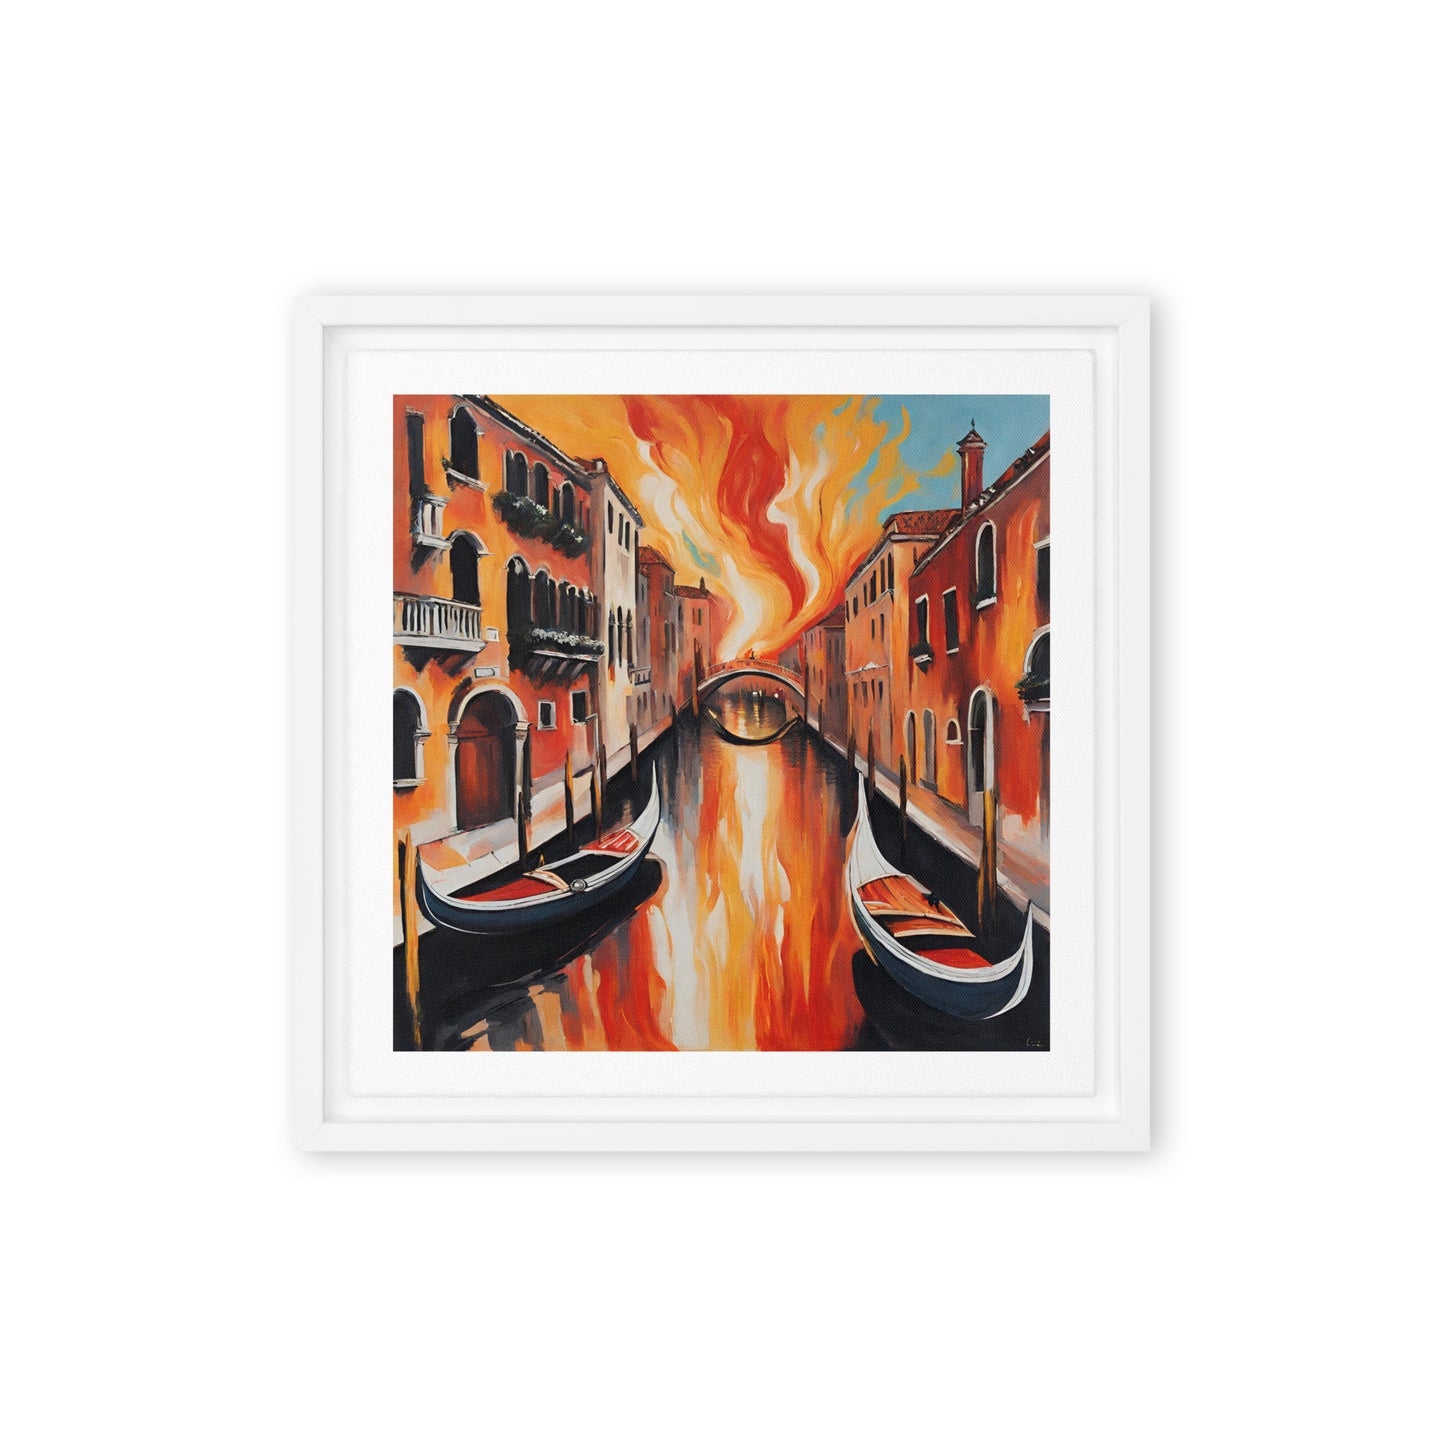 Venice in flames - Framed canvas